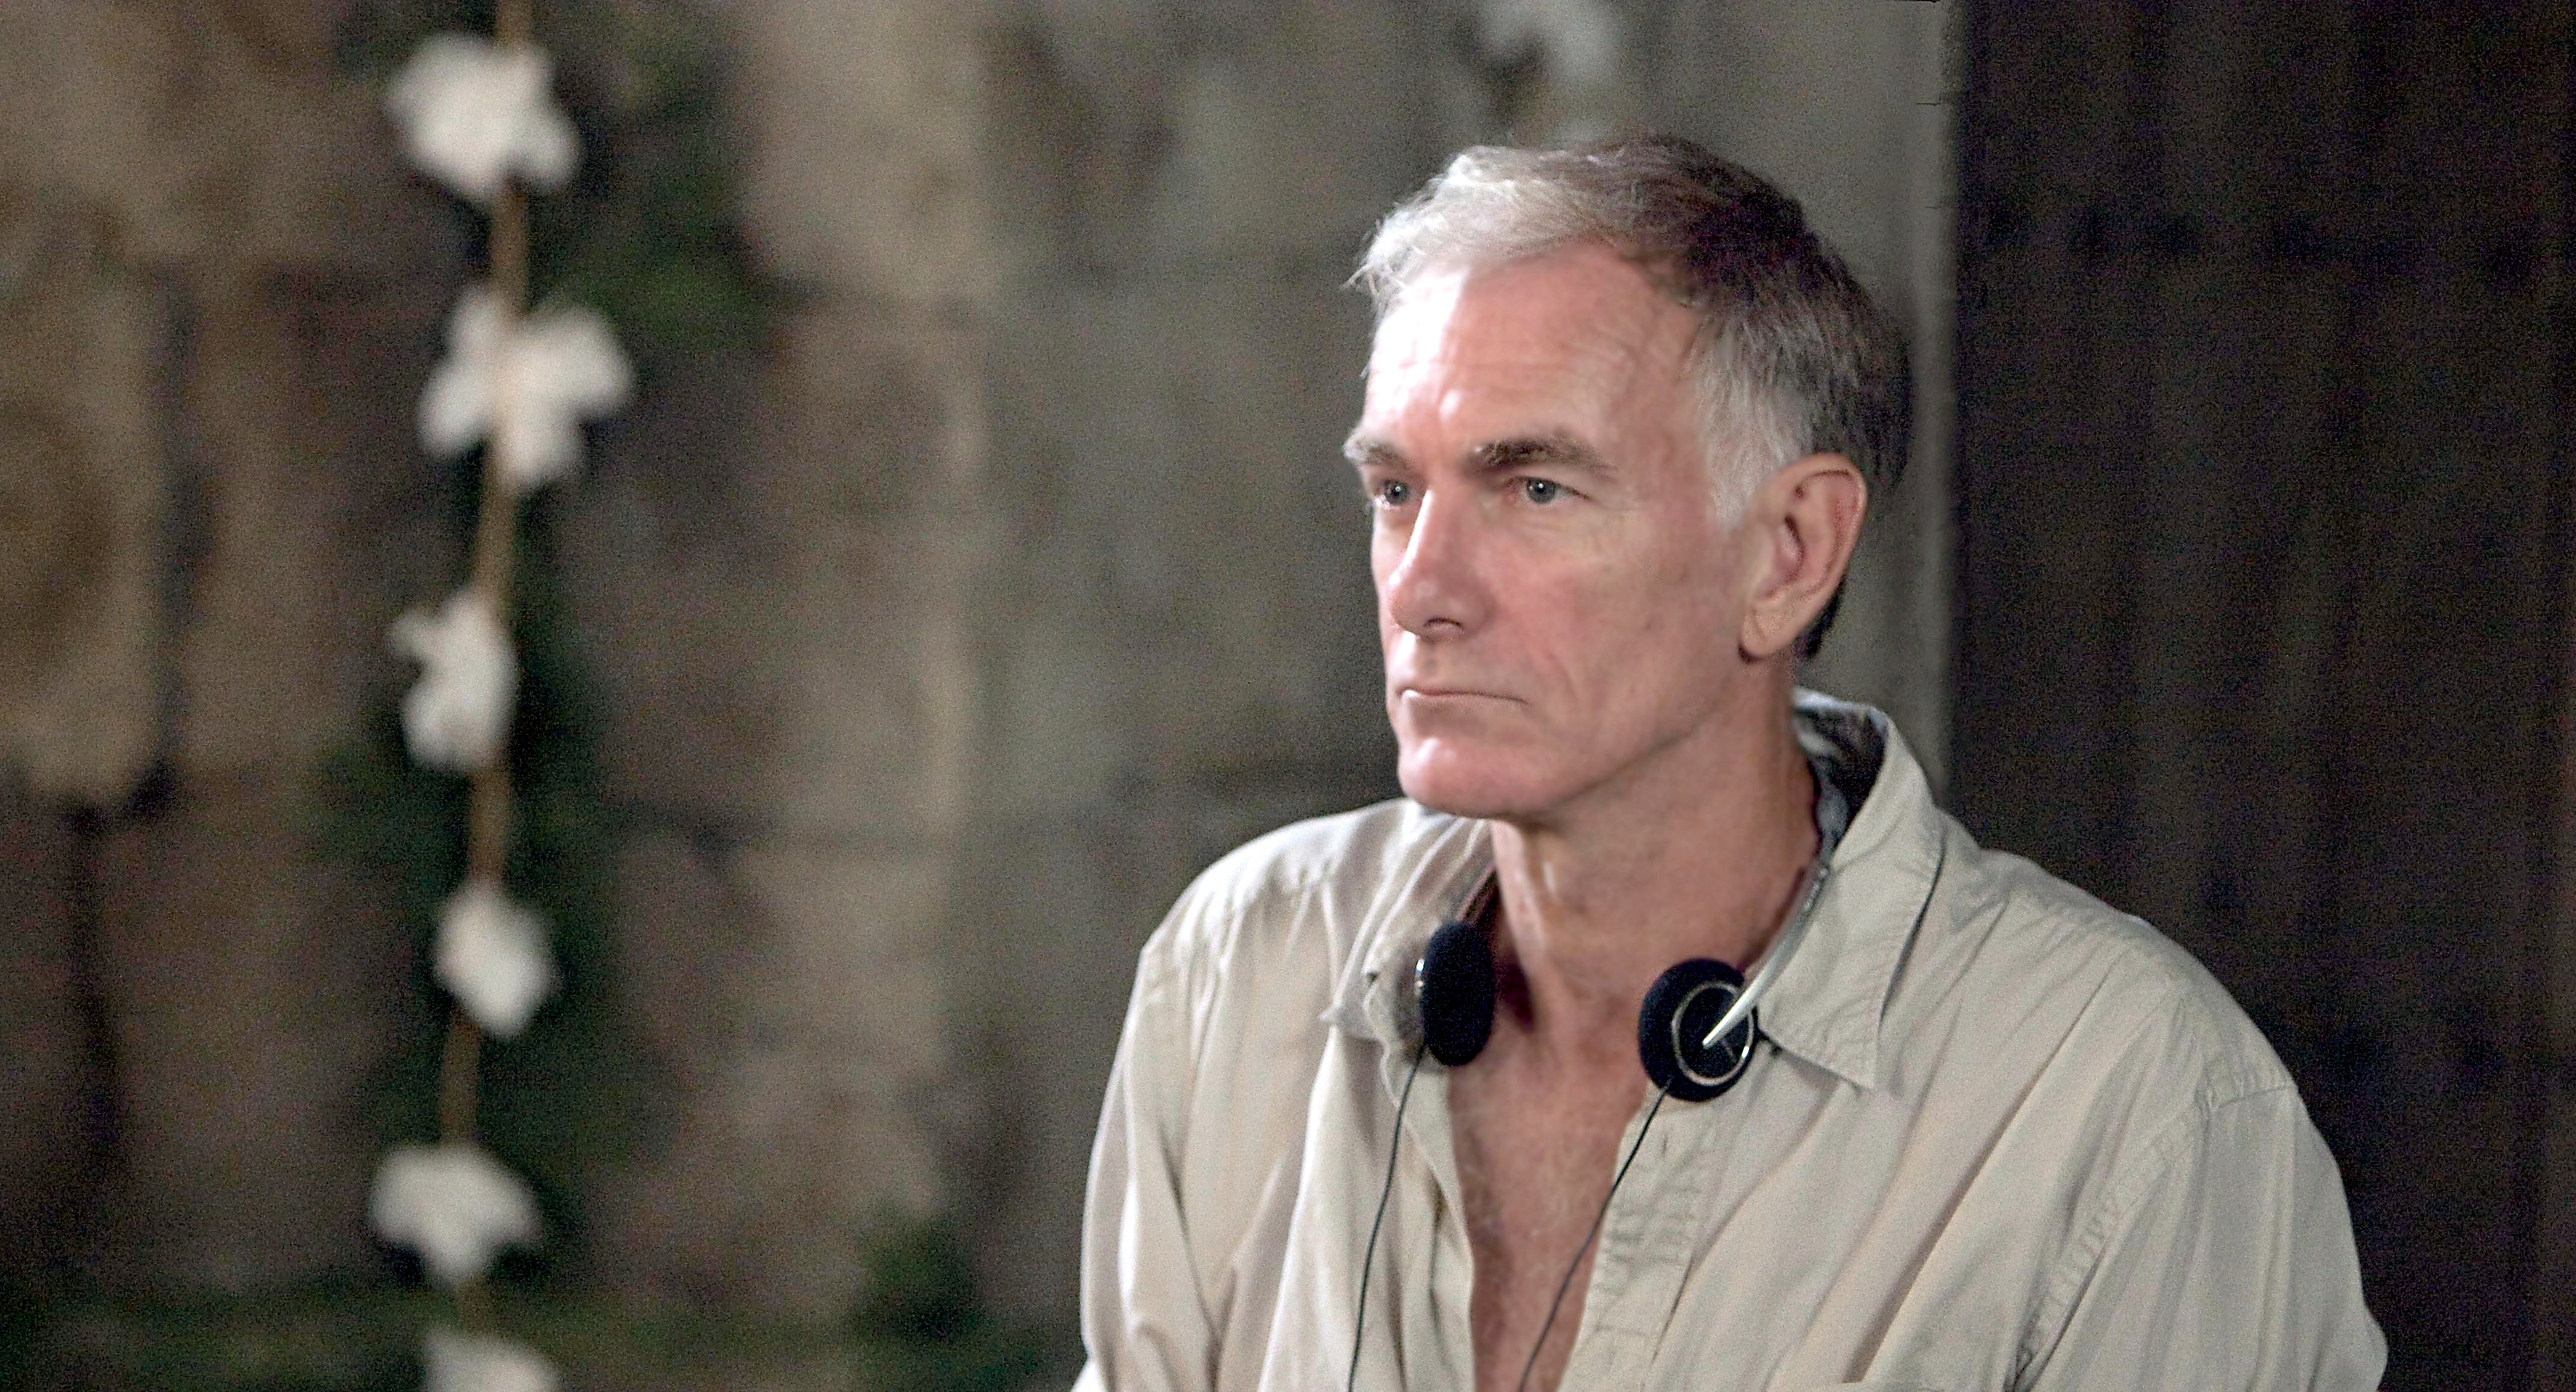 Writer and director John Sayles will visit The Port Townsend Film Festival this year. — Mary Cybulski